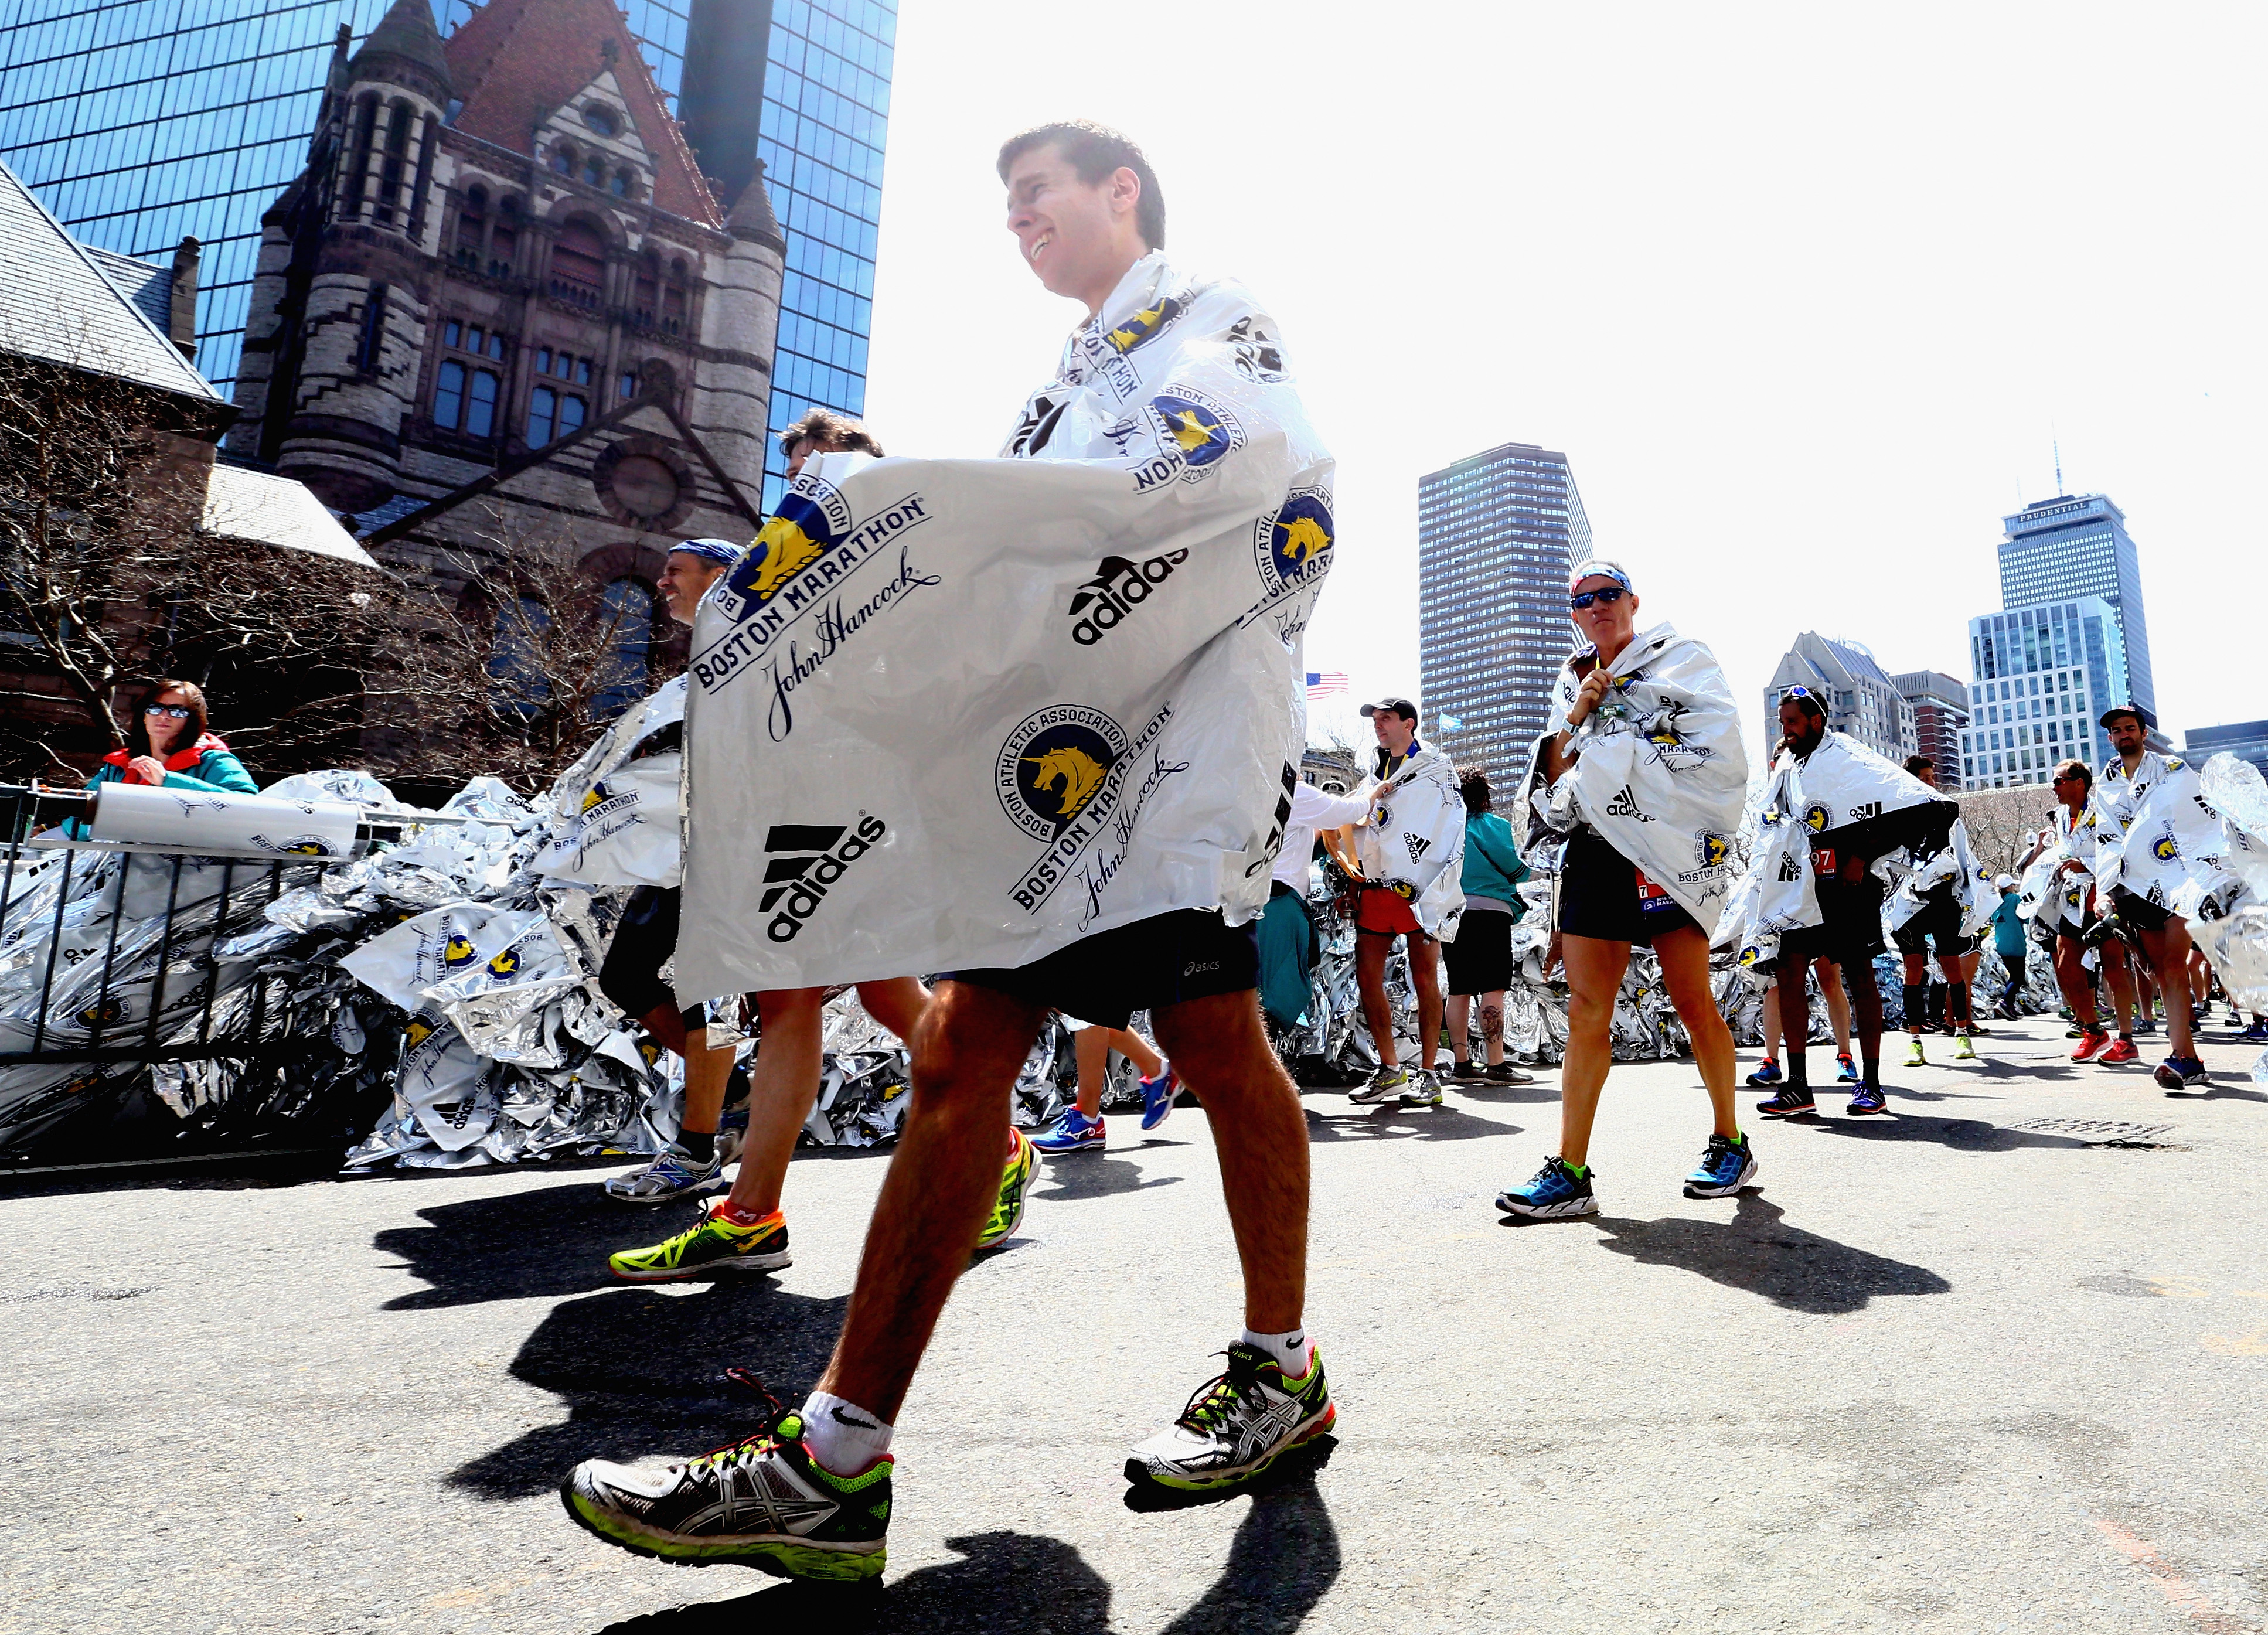 charter shorthand protection Adidas Apologizes for 'You Survived' Boston Marathon Email | Time